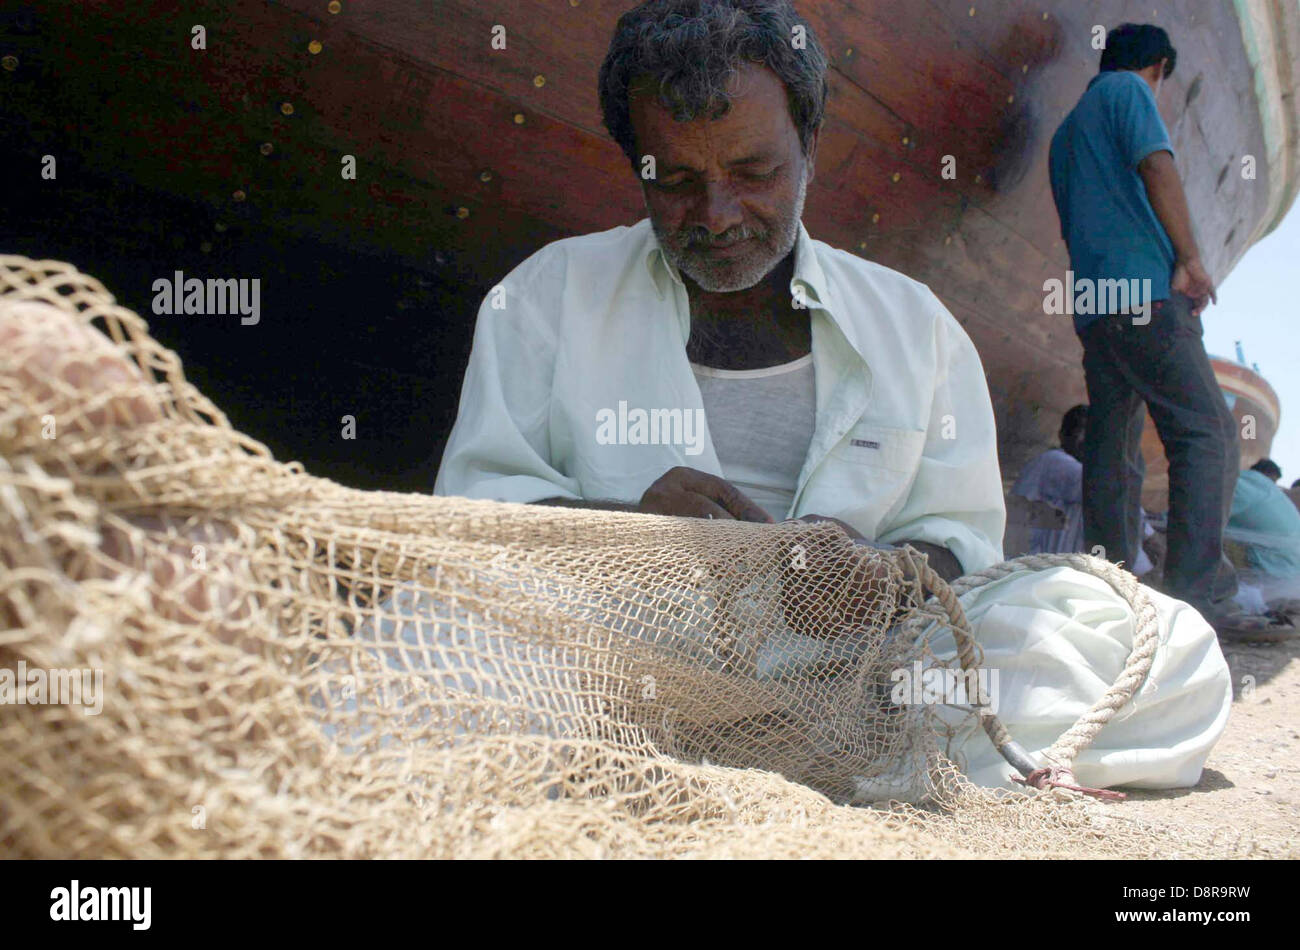 Man busy in knitting fish catching net to earn his livelihood for support  his family, on other hand fishing is ban due to rough sea, at Fishery in  Ibrahim Hyderi in Karachi